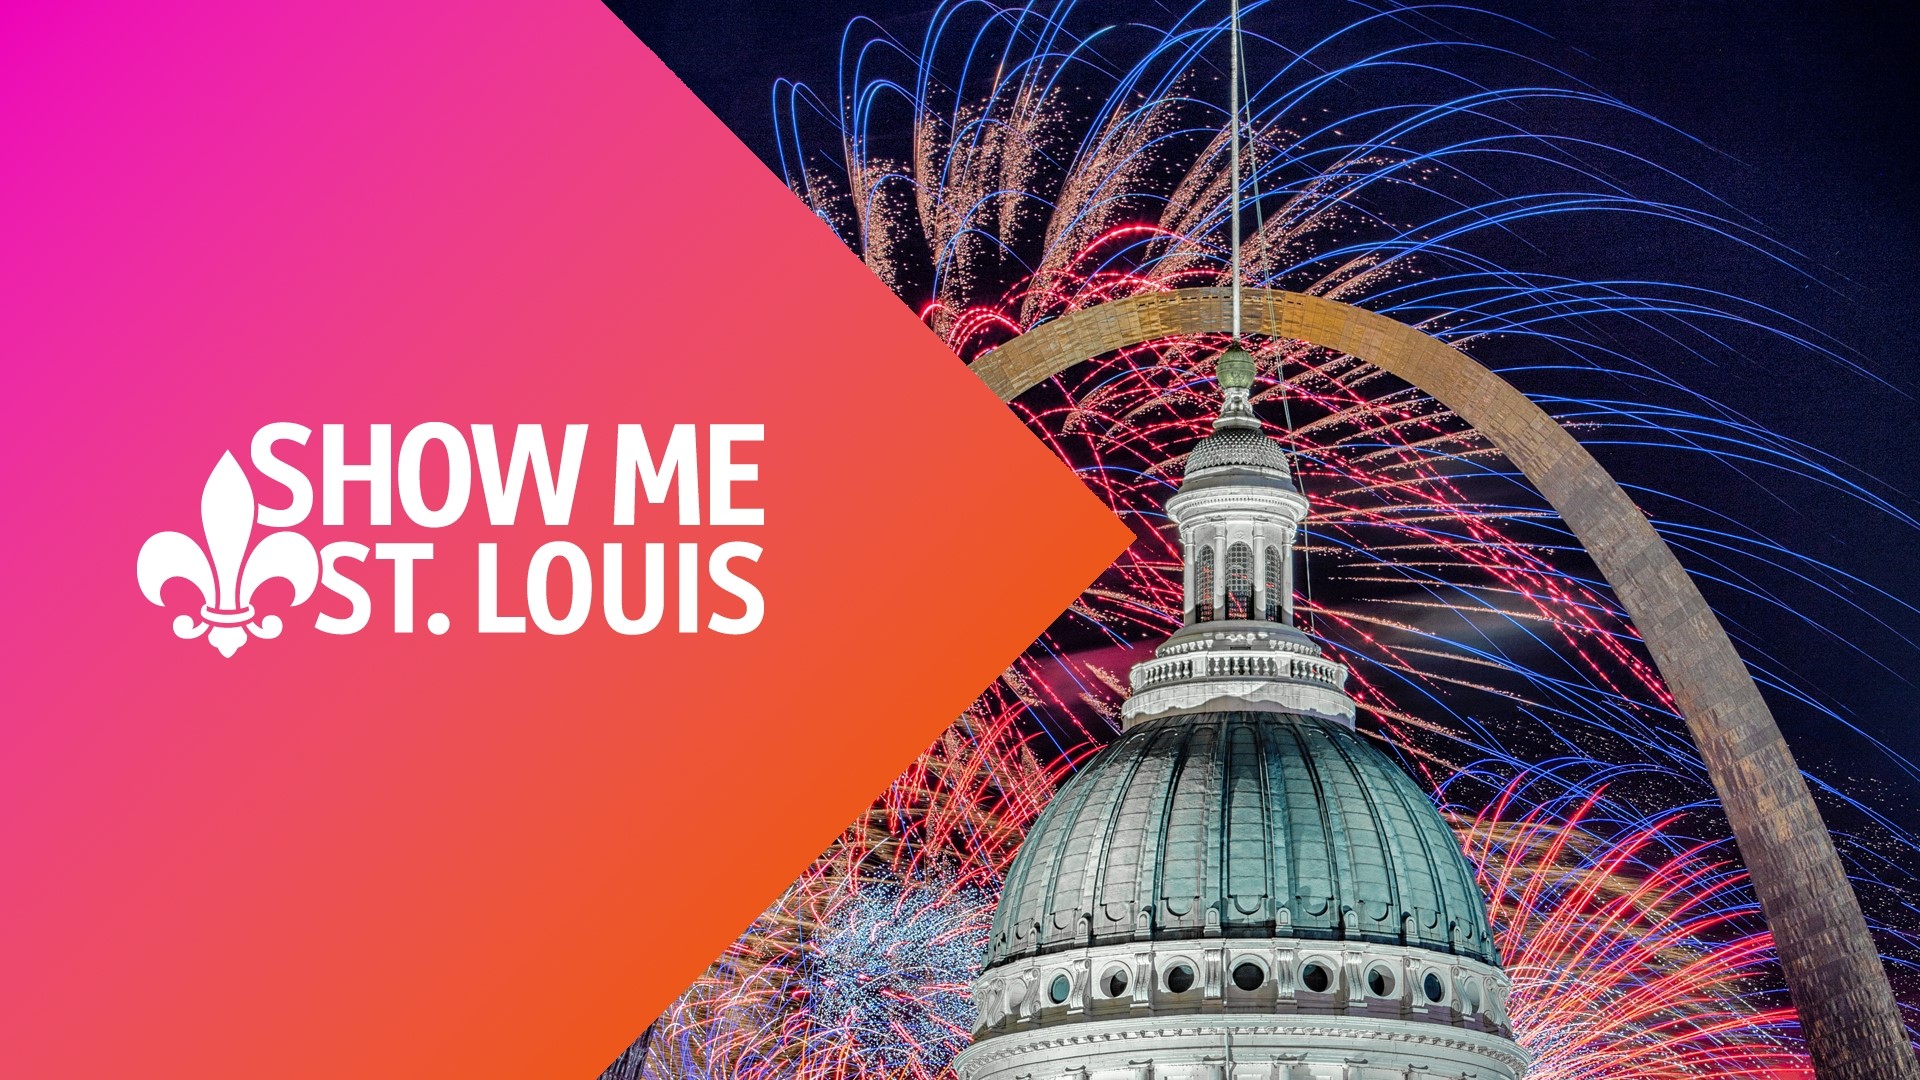 St. Louis' longest-running live and local lifestyle show. Consider us your guide to everything St. Louis. Featuring hidden gems, interesting people & what's new.